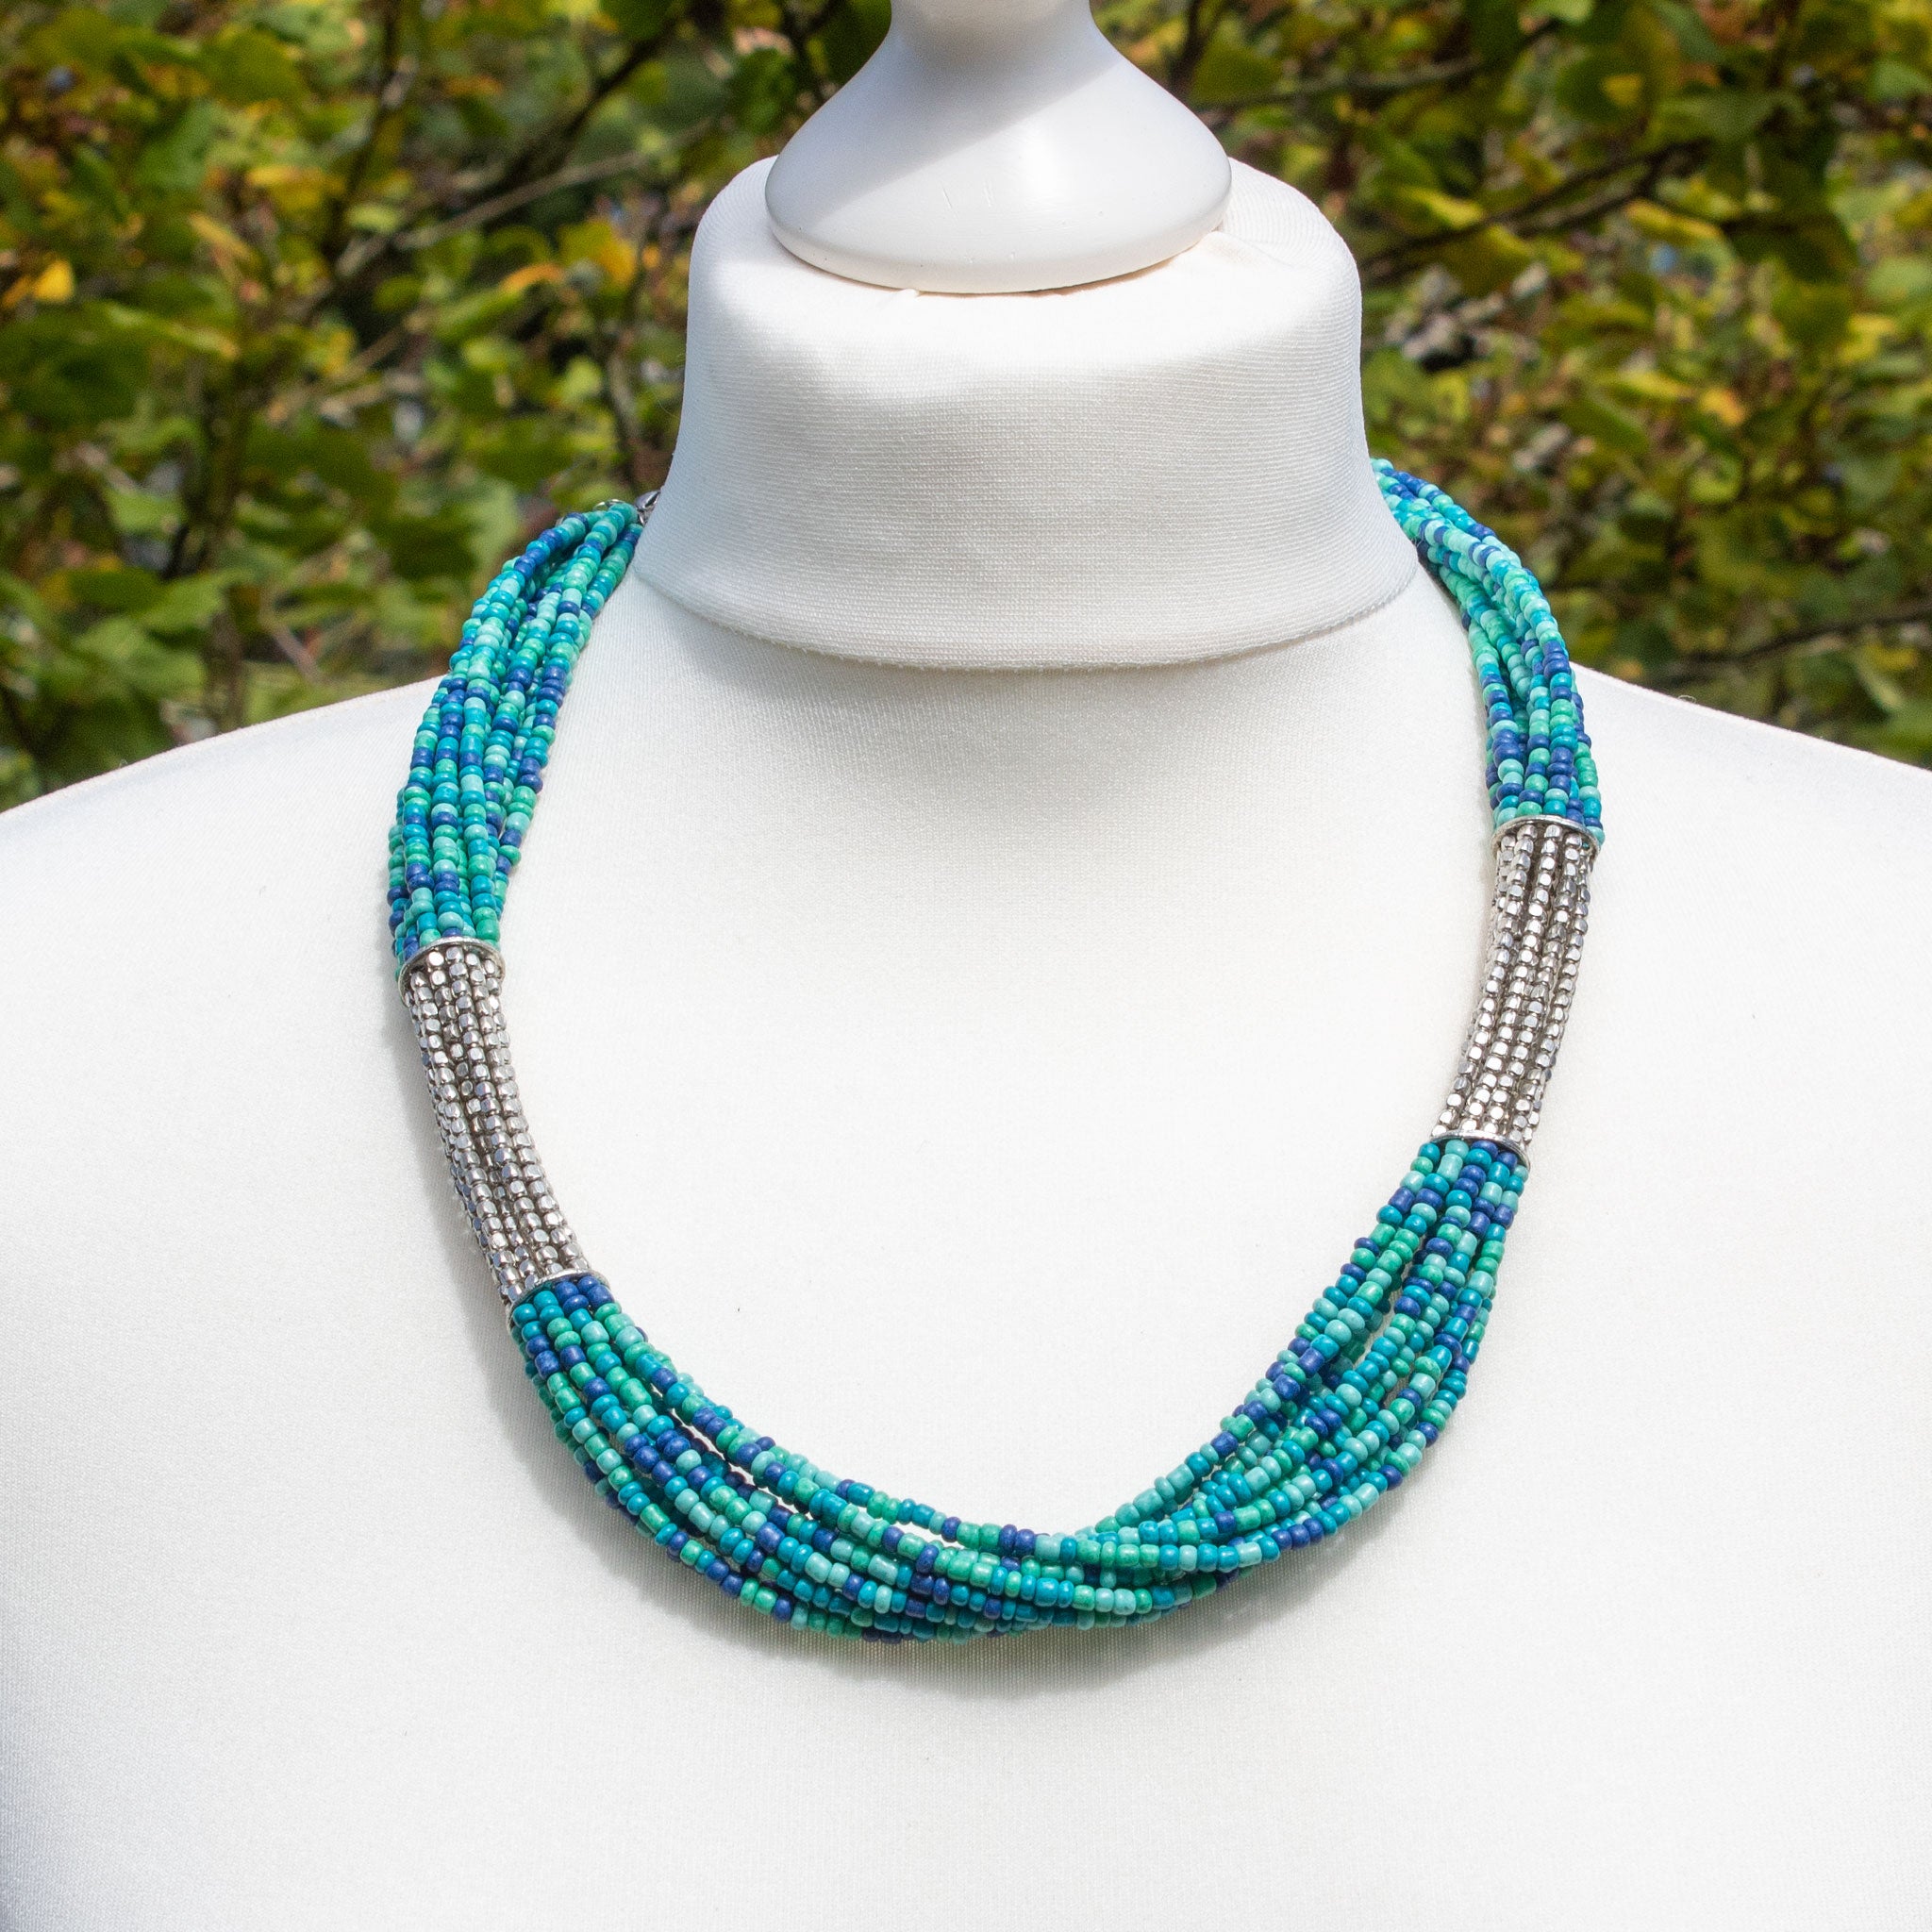 Turquoise & Silver Glass Bead Necklace - The Naughty Shrew